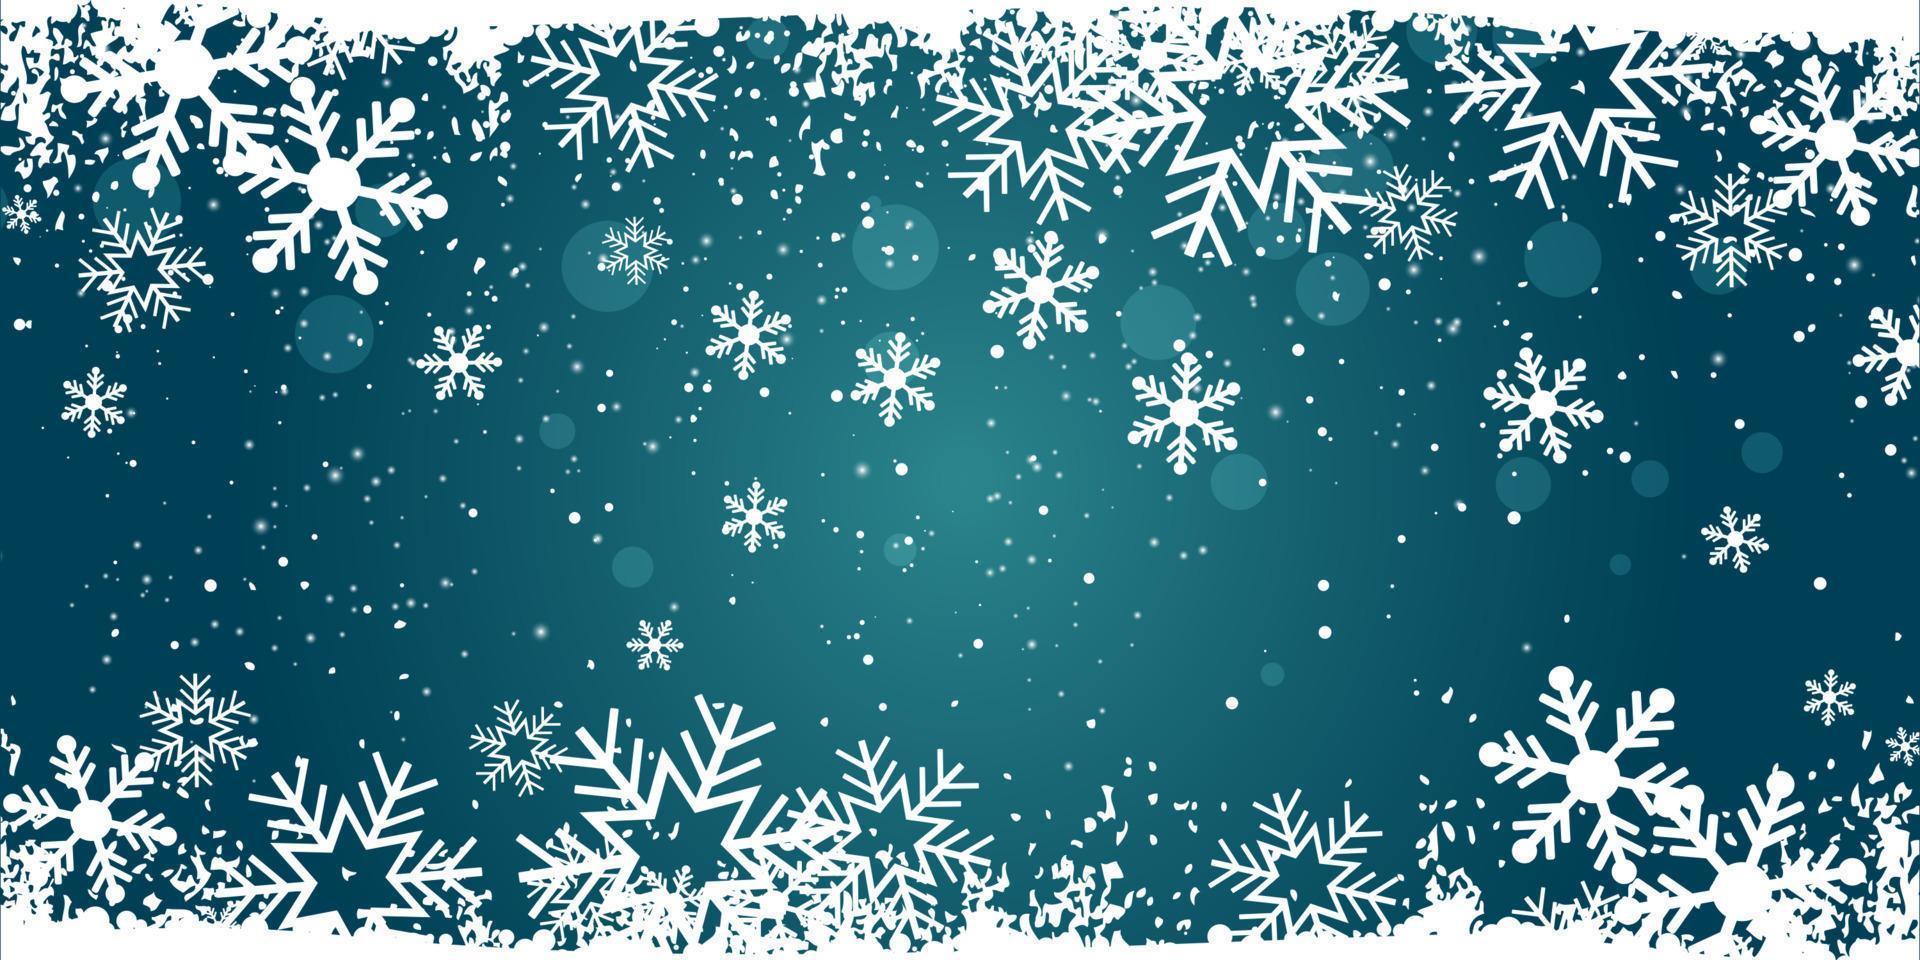 Christmas banner with snowy design vector